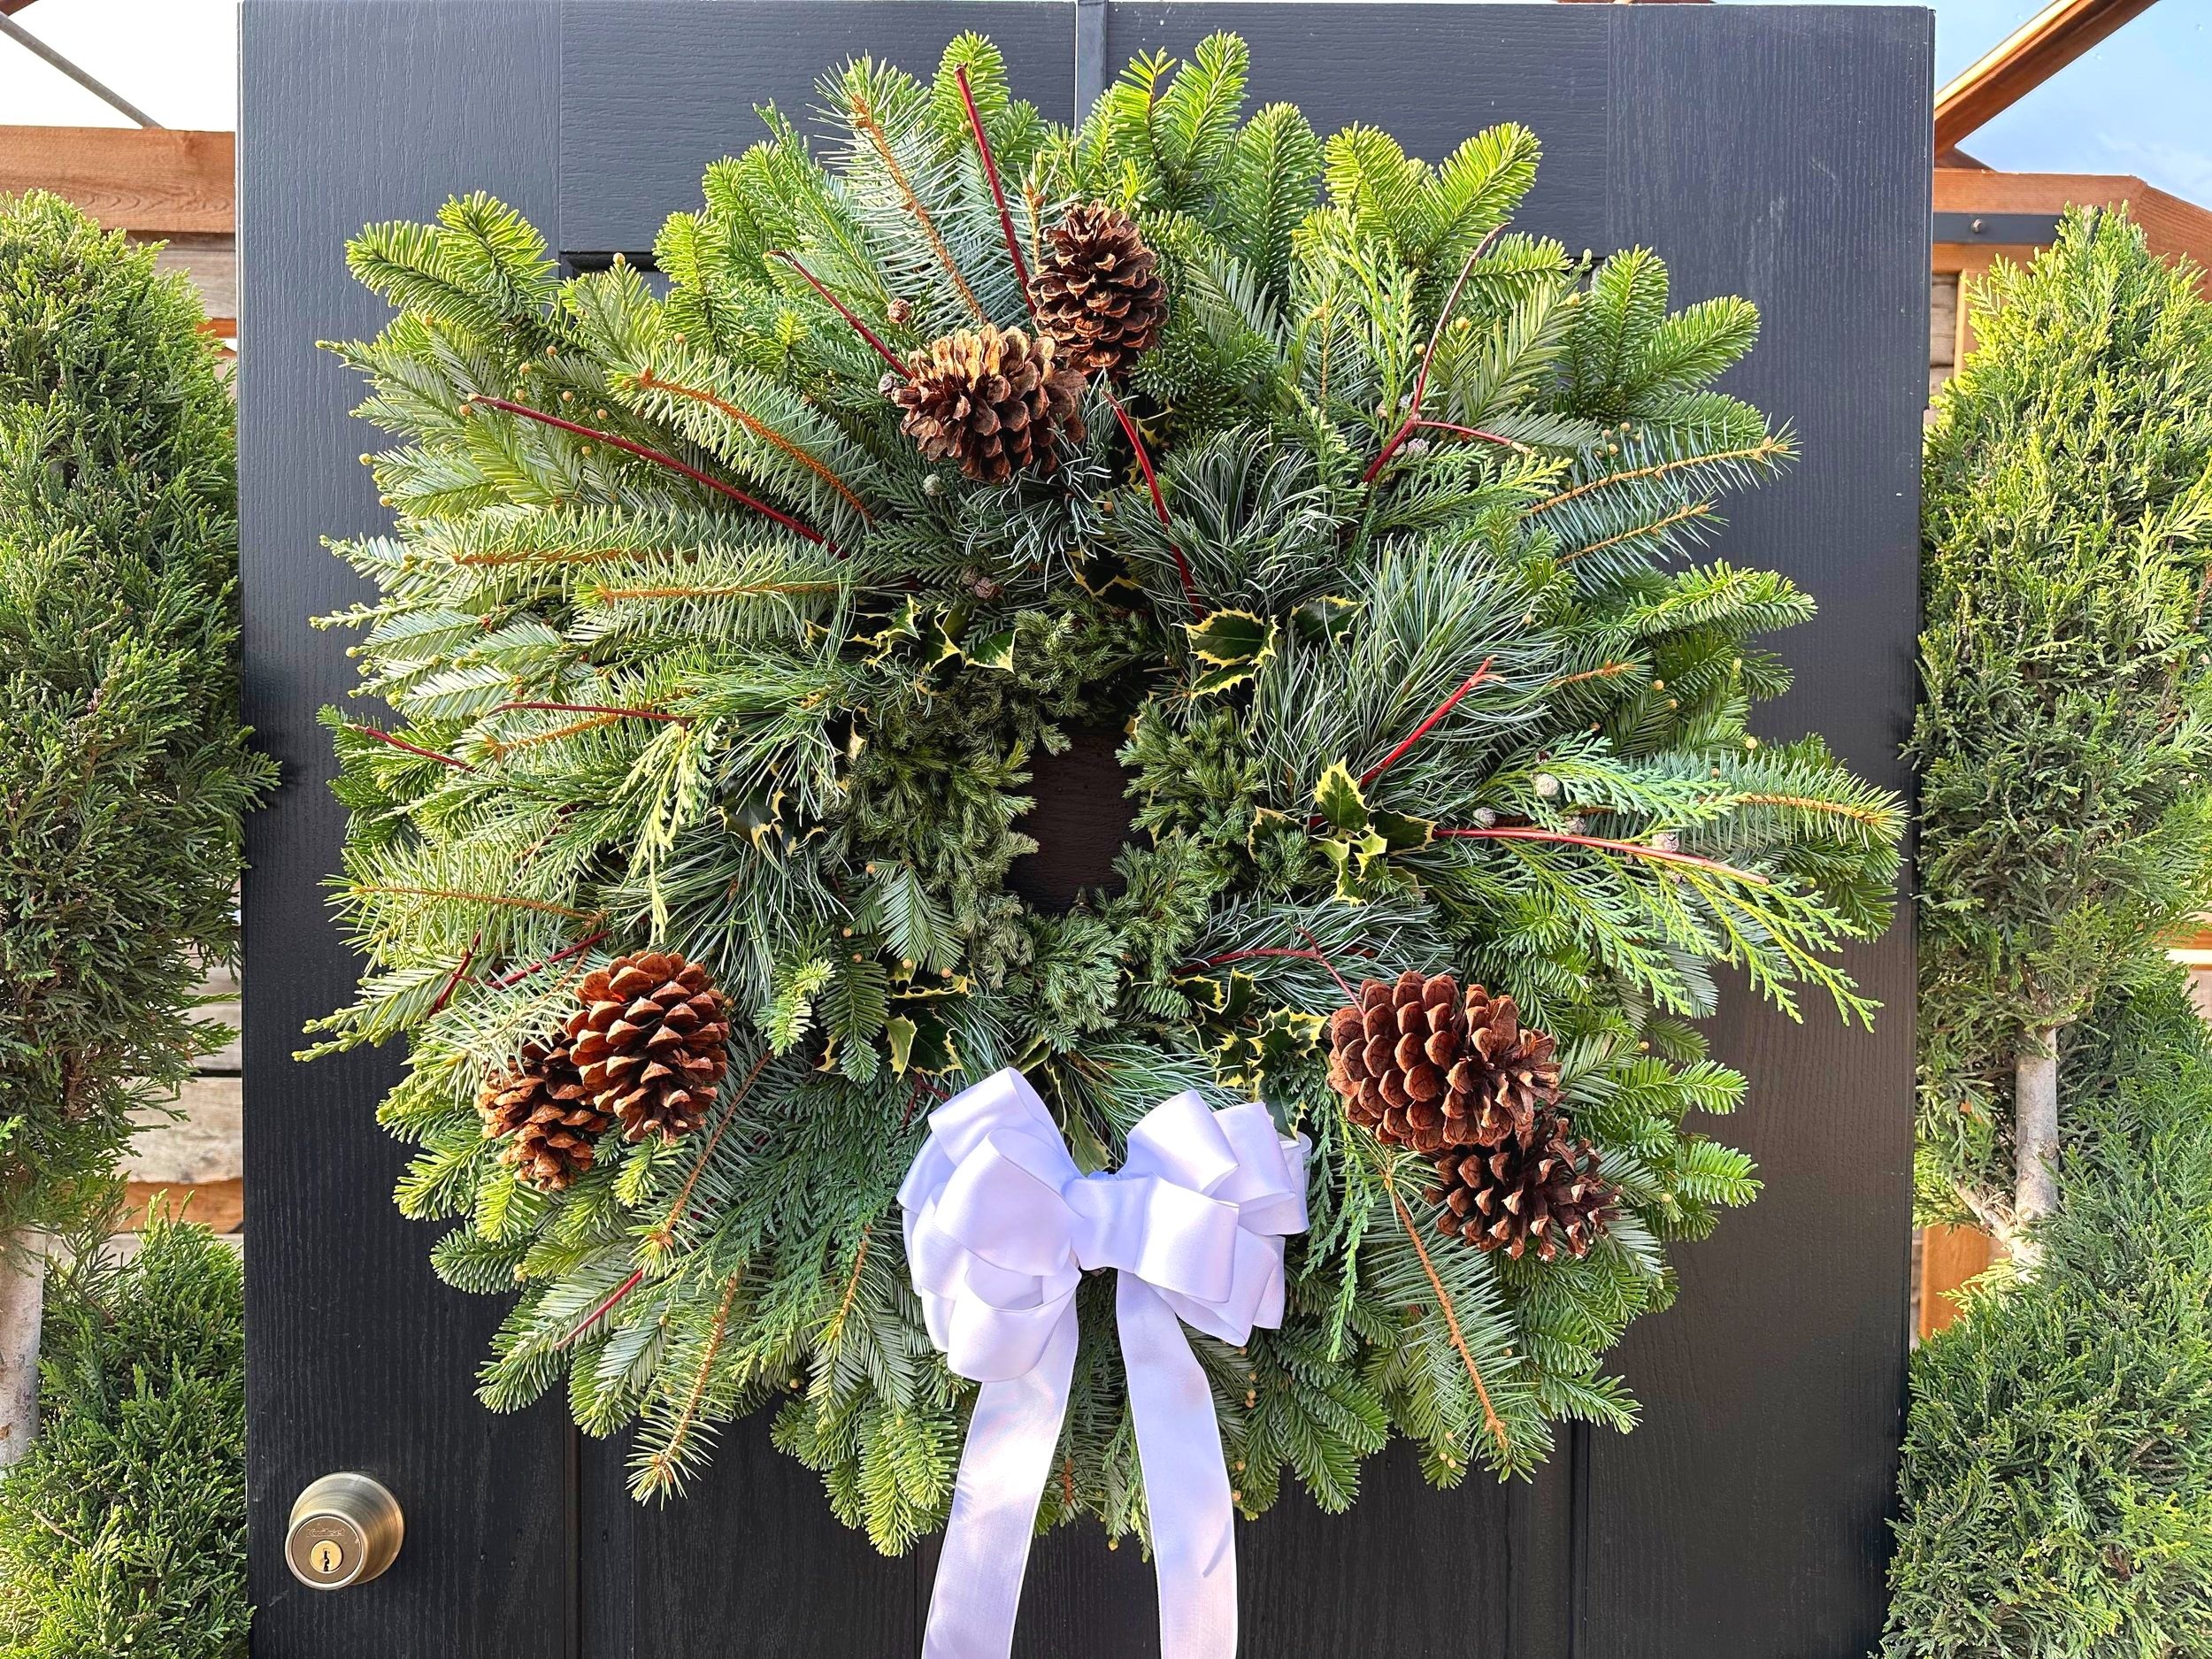 Wreath+%236+with+pinecones+%26+white+bow.jpg